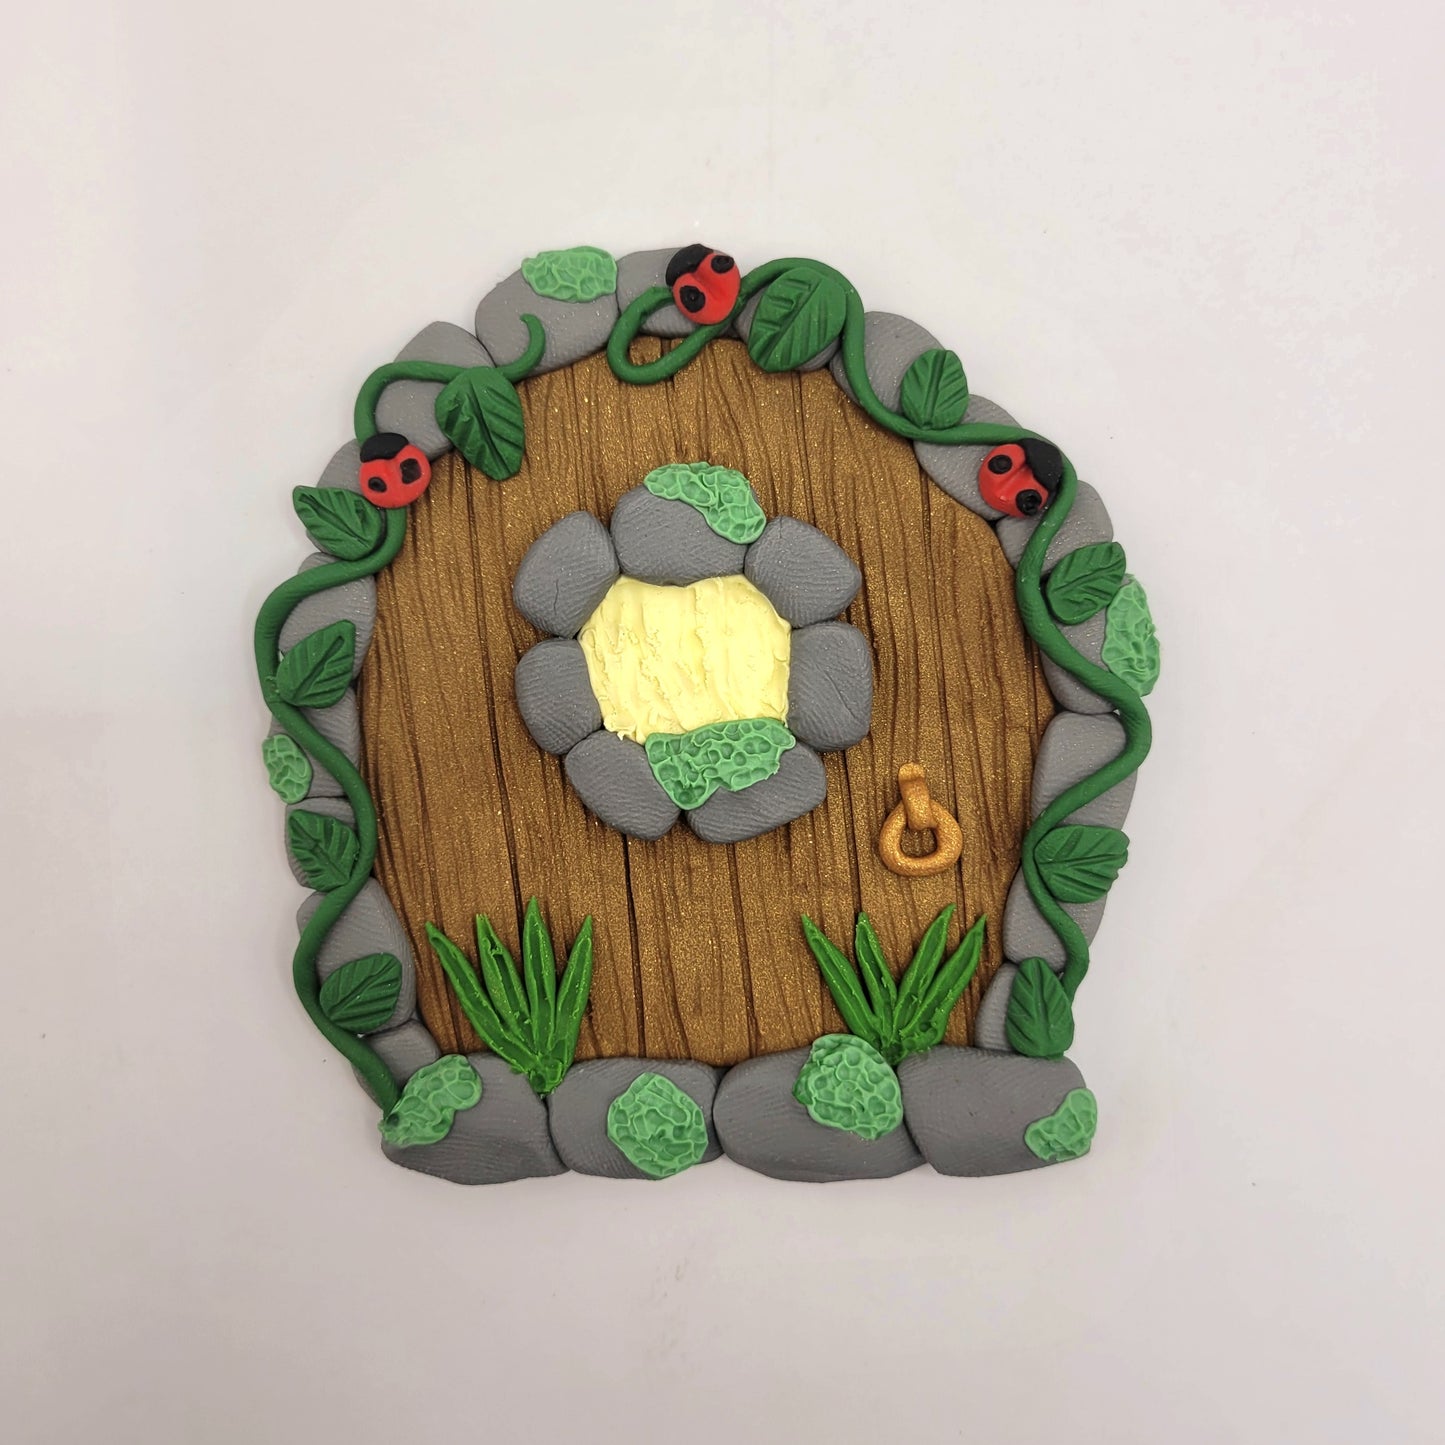 The ladybug fairy door rests on a white background. The mini ladybug door is brown wood patterned with grey cobblestone finish, a window and a door knob. It is detailed with green grass, moss, vines and, of course, ladybugs!